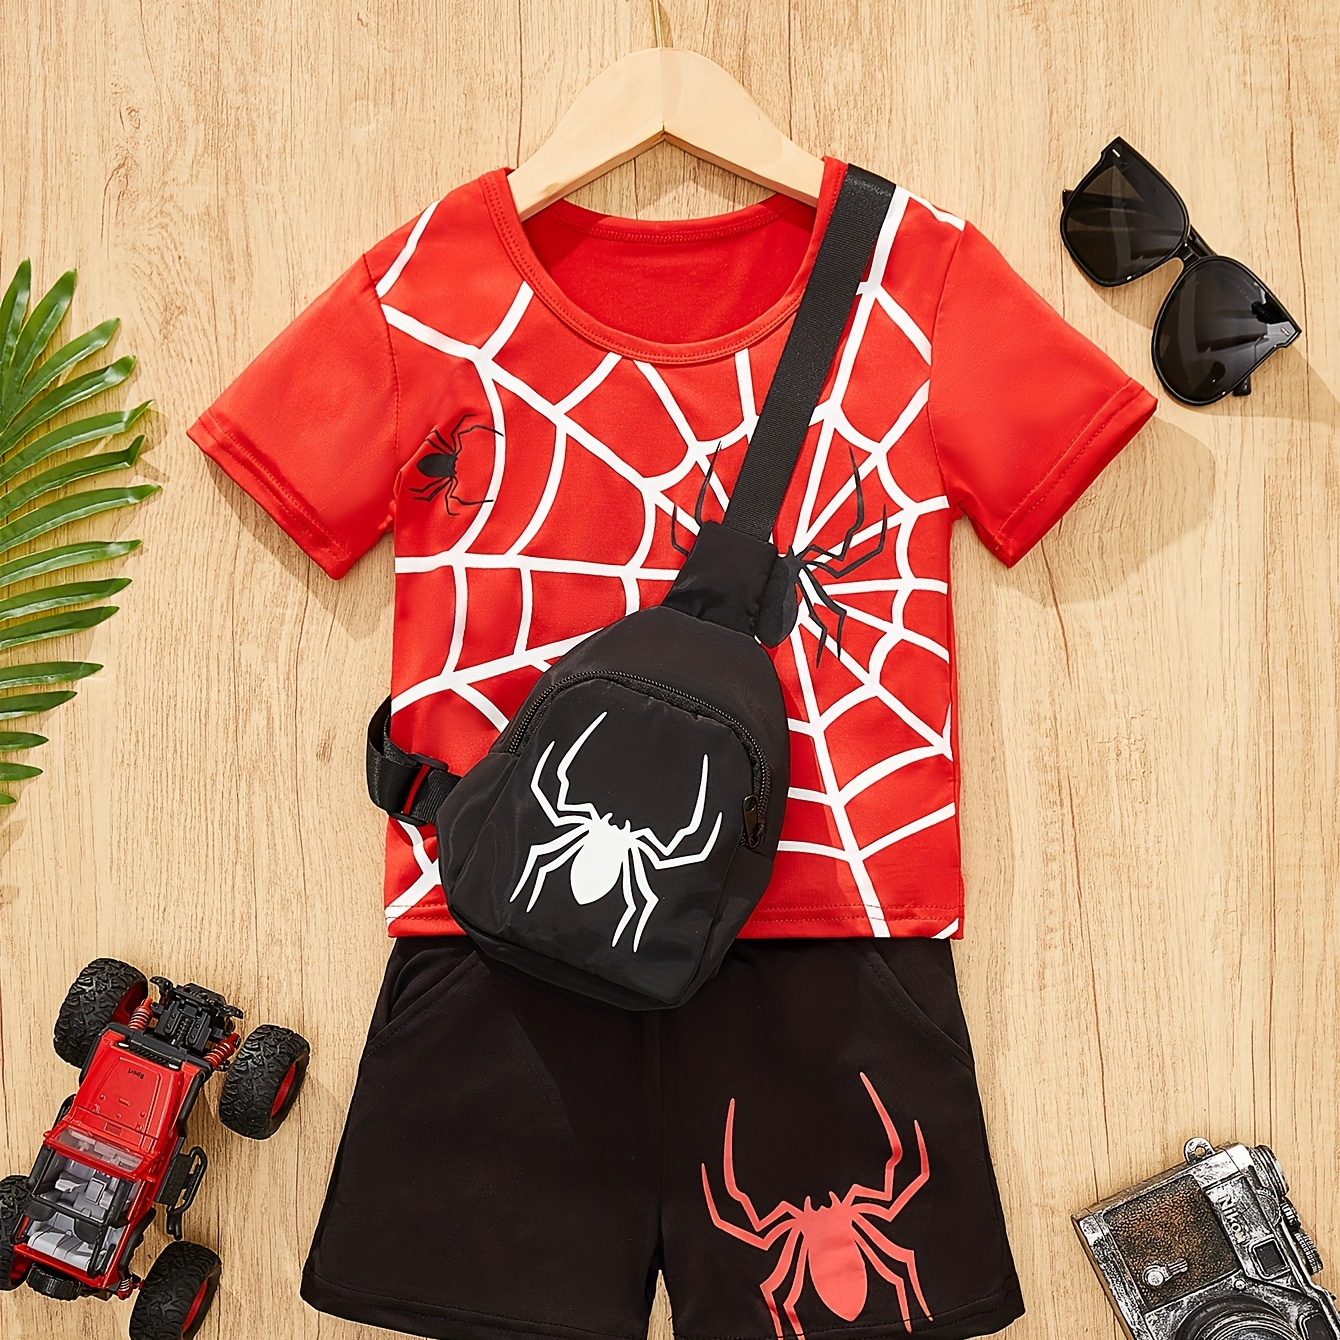 

Boy's 3-piece Casual Co Ord Set, Spider Web Print Short Sleeve T-shirt, Bag And Shorts, Suitable For Summer Daily